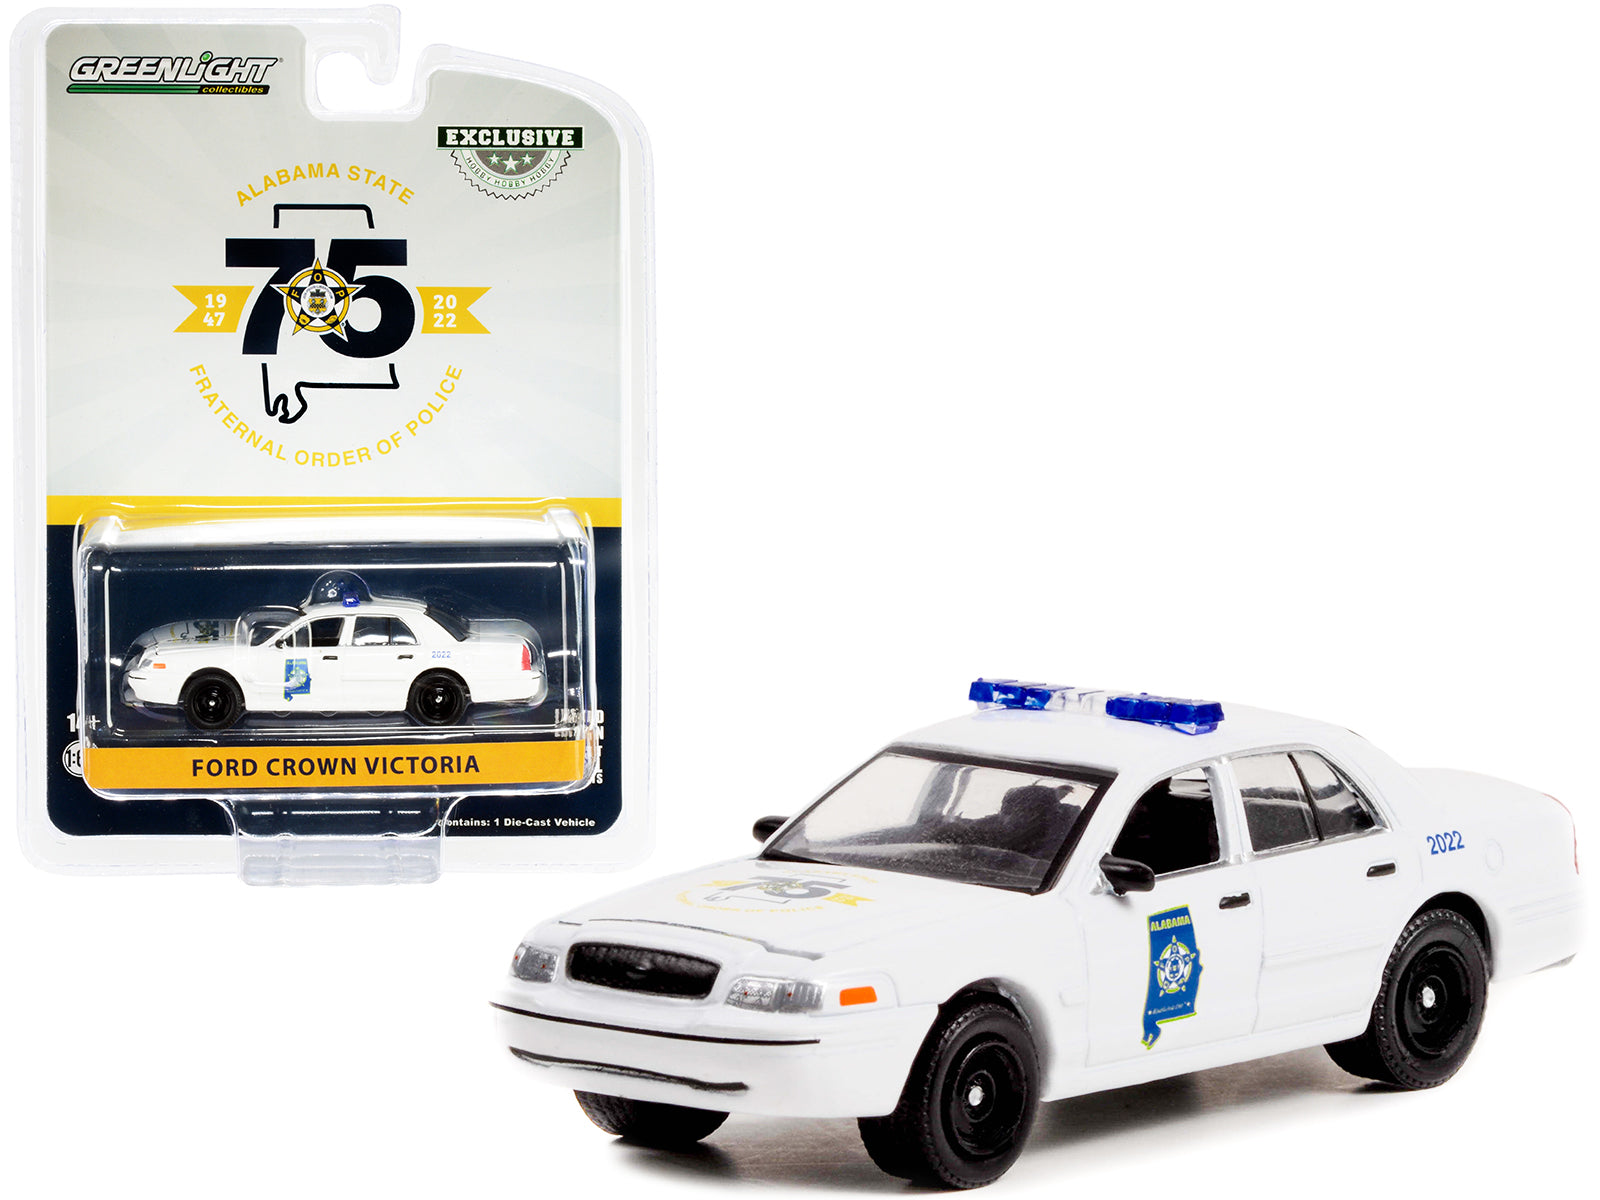 *SPECIAL* Ford Crown Victoria Police Interceptor White Alabama State FOP "Fraternal Order of Police 75th Anniversary" "Hobby Exclusive" 1/64 Diecast Model Car by Greenlight